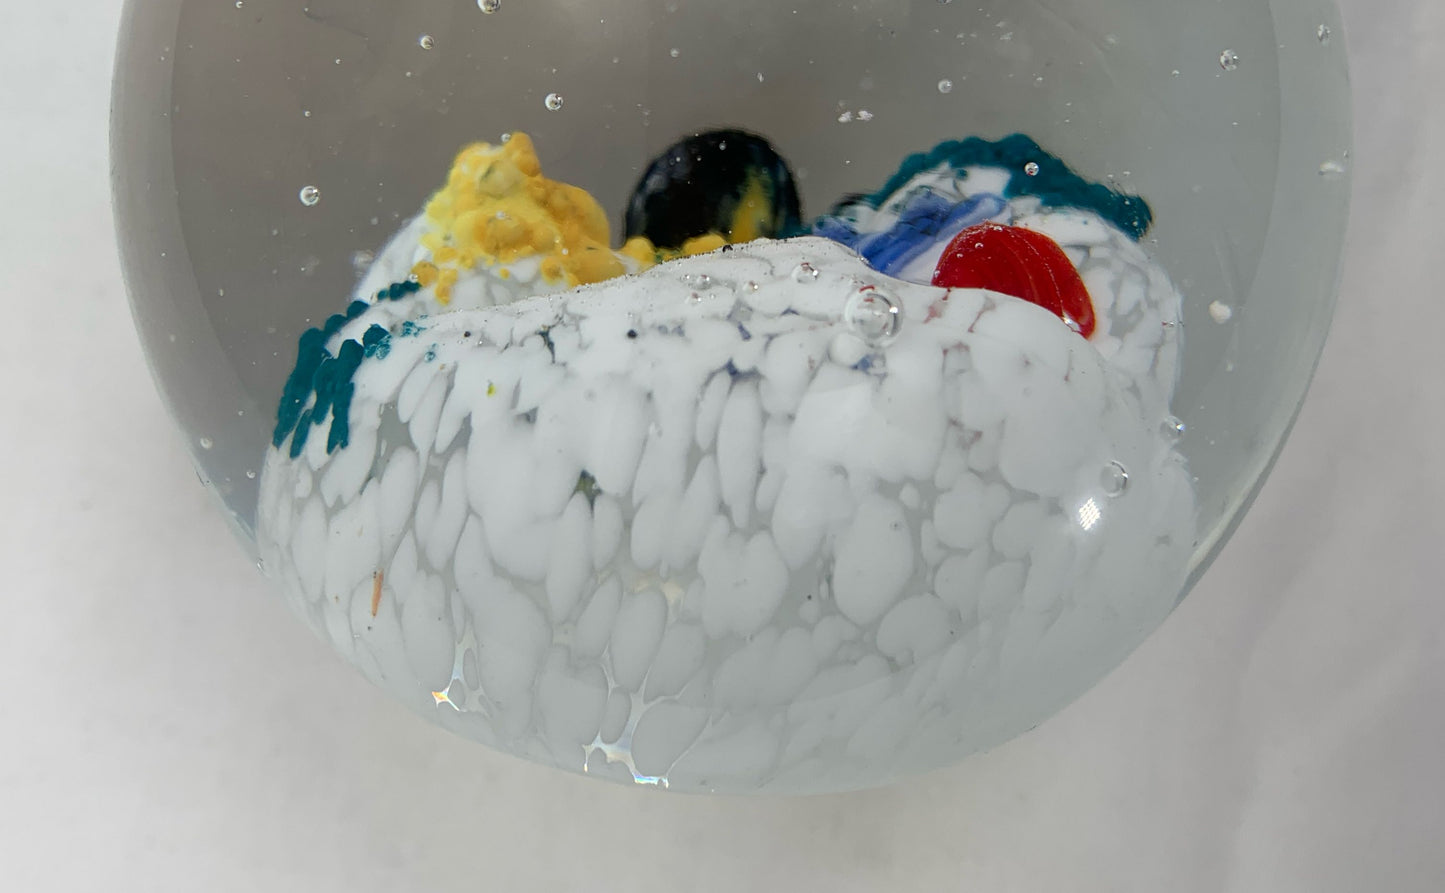 Vintage Dynasty Gallery Heirloom Collectibles Art Glass Globe-Paperweight-Ocean